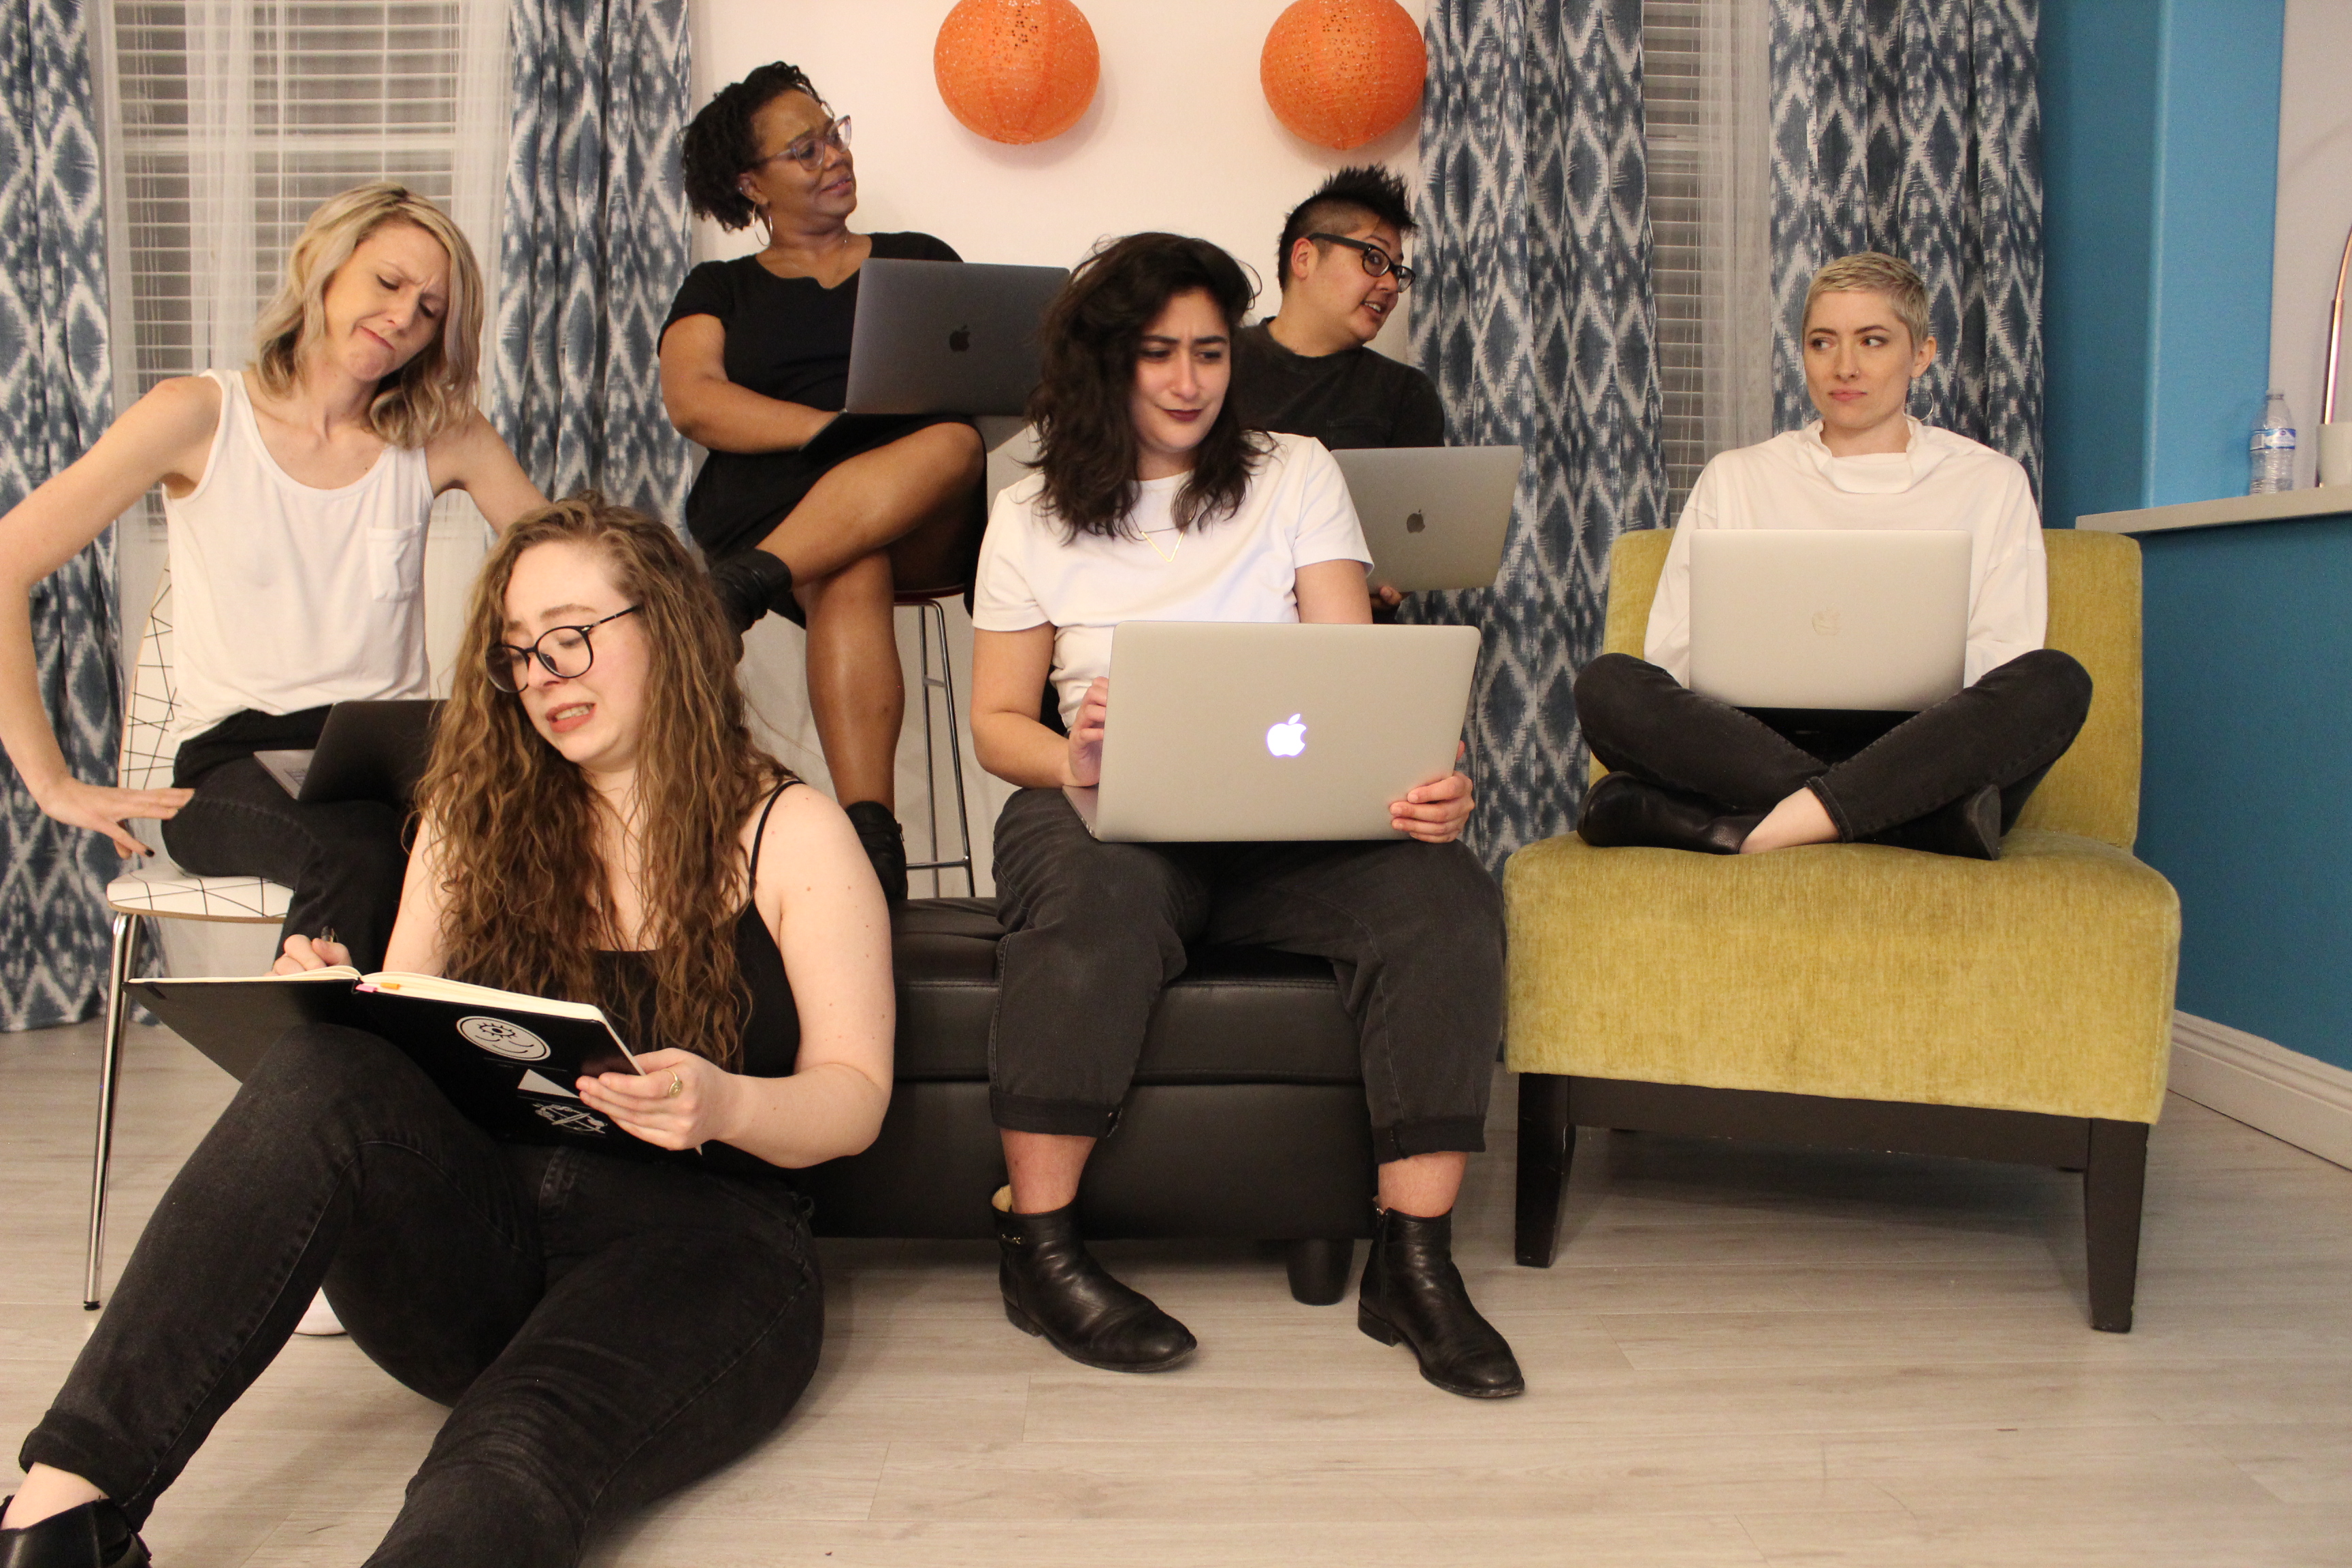 the team: riese, rachel, sarah, carmen, kamala, and laneia look concerned while staring at their computers